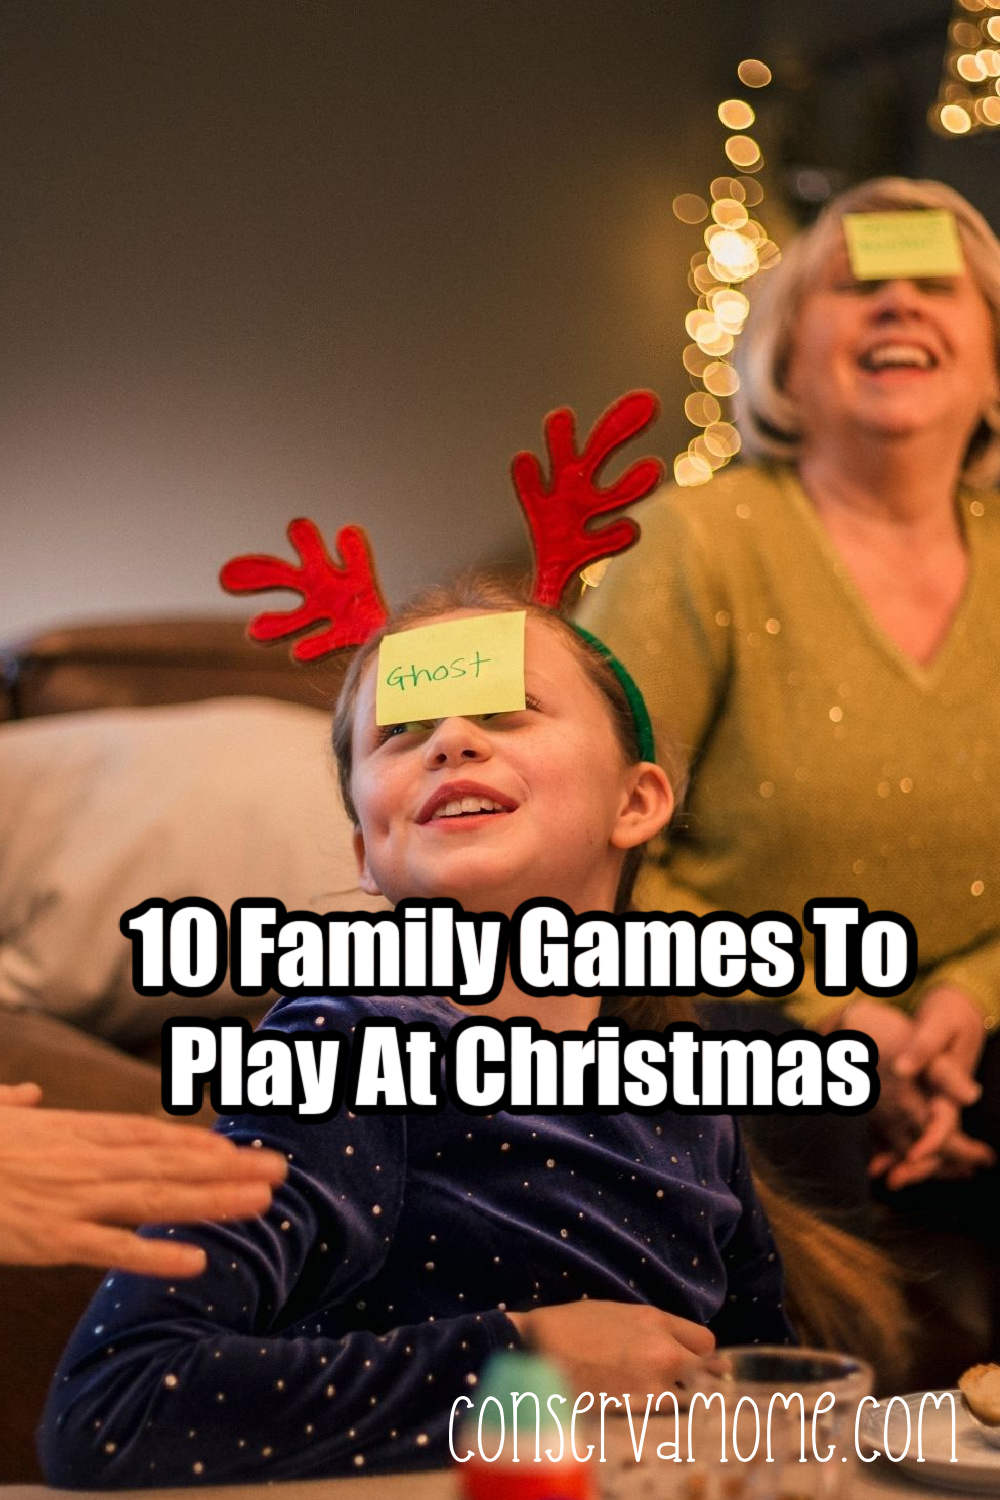 10 Family Games To Play At Christmas - ConservaMom